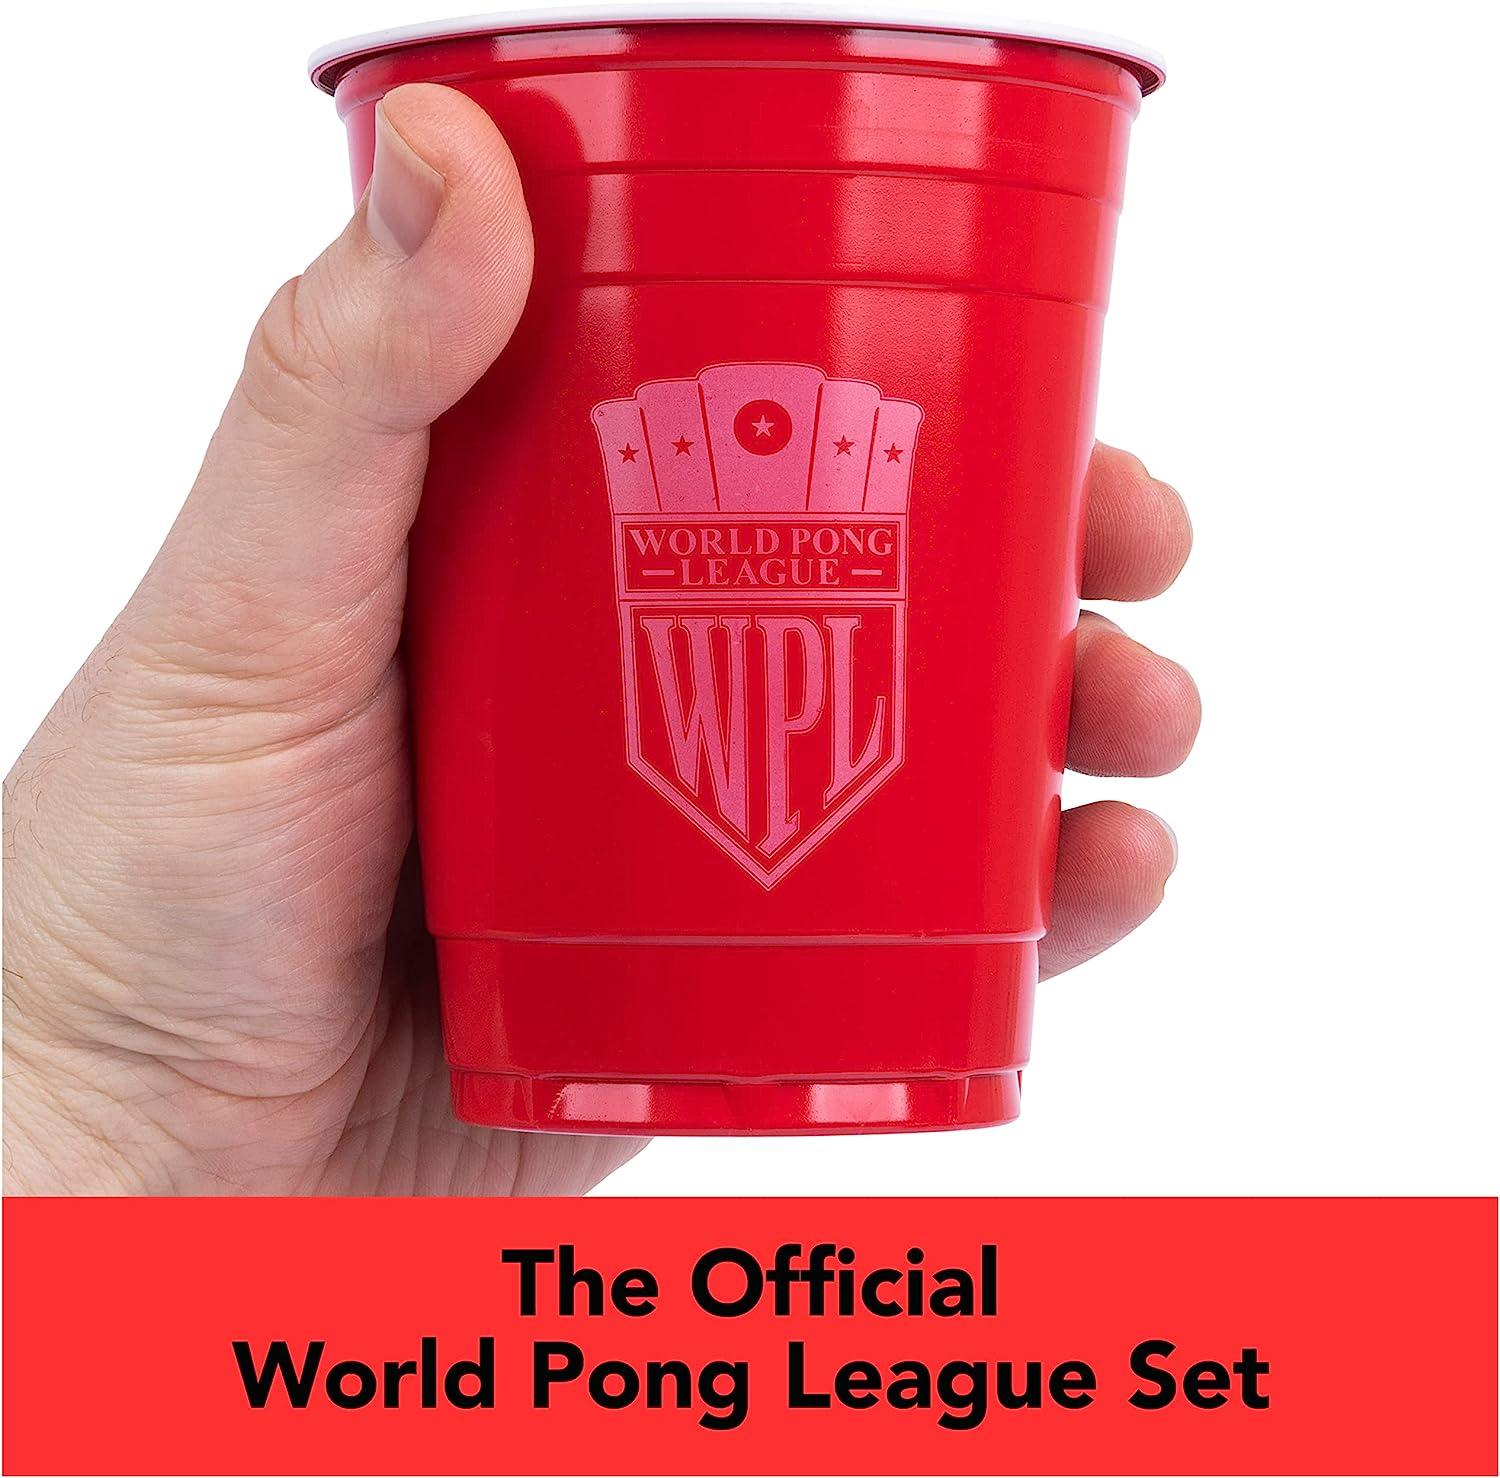 Post Malone, World Pong League Beer Pong Drinking Game for Bachelor Party  Outdoor Games with Plastic Cups Ping Pong Balls, for Adults Ages 18 and up